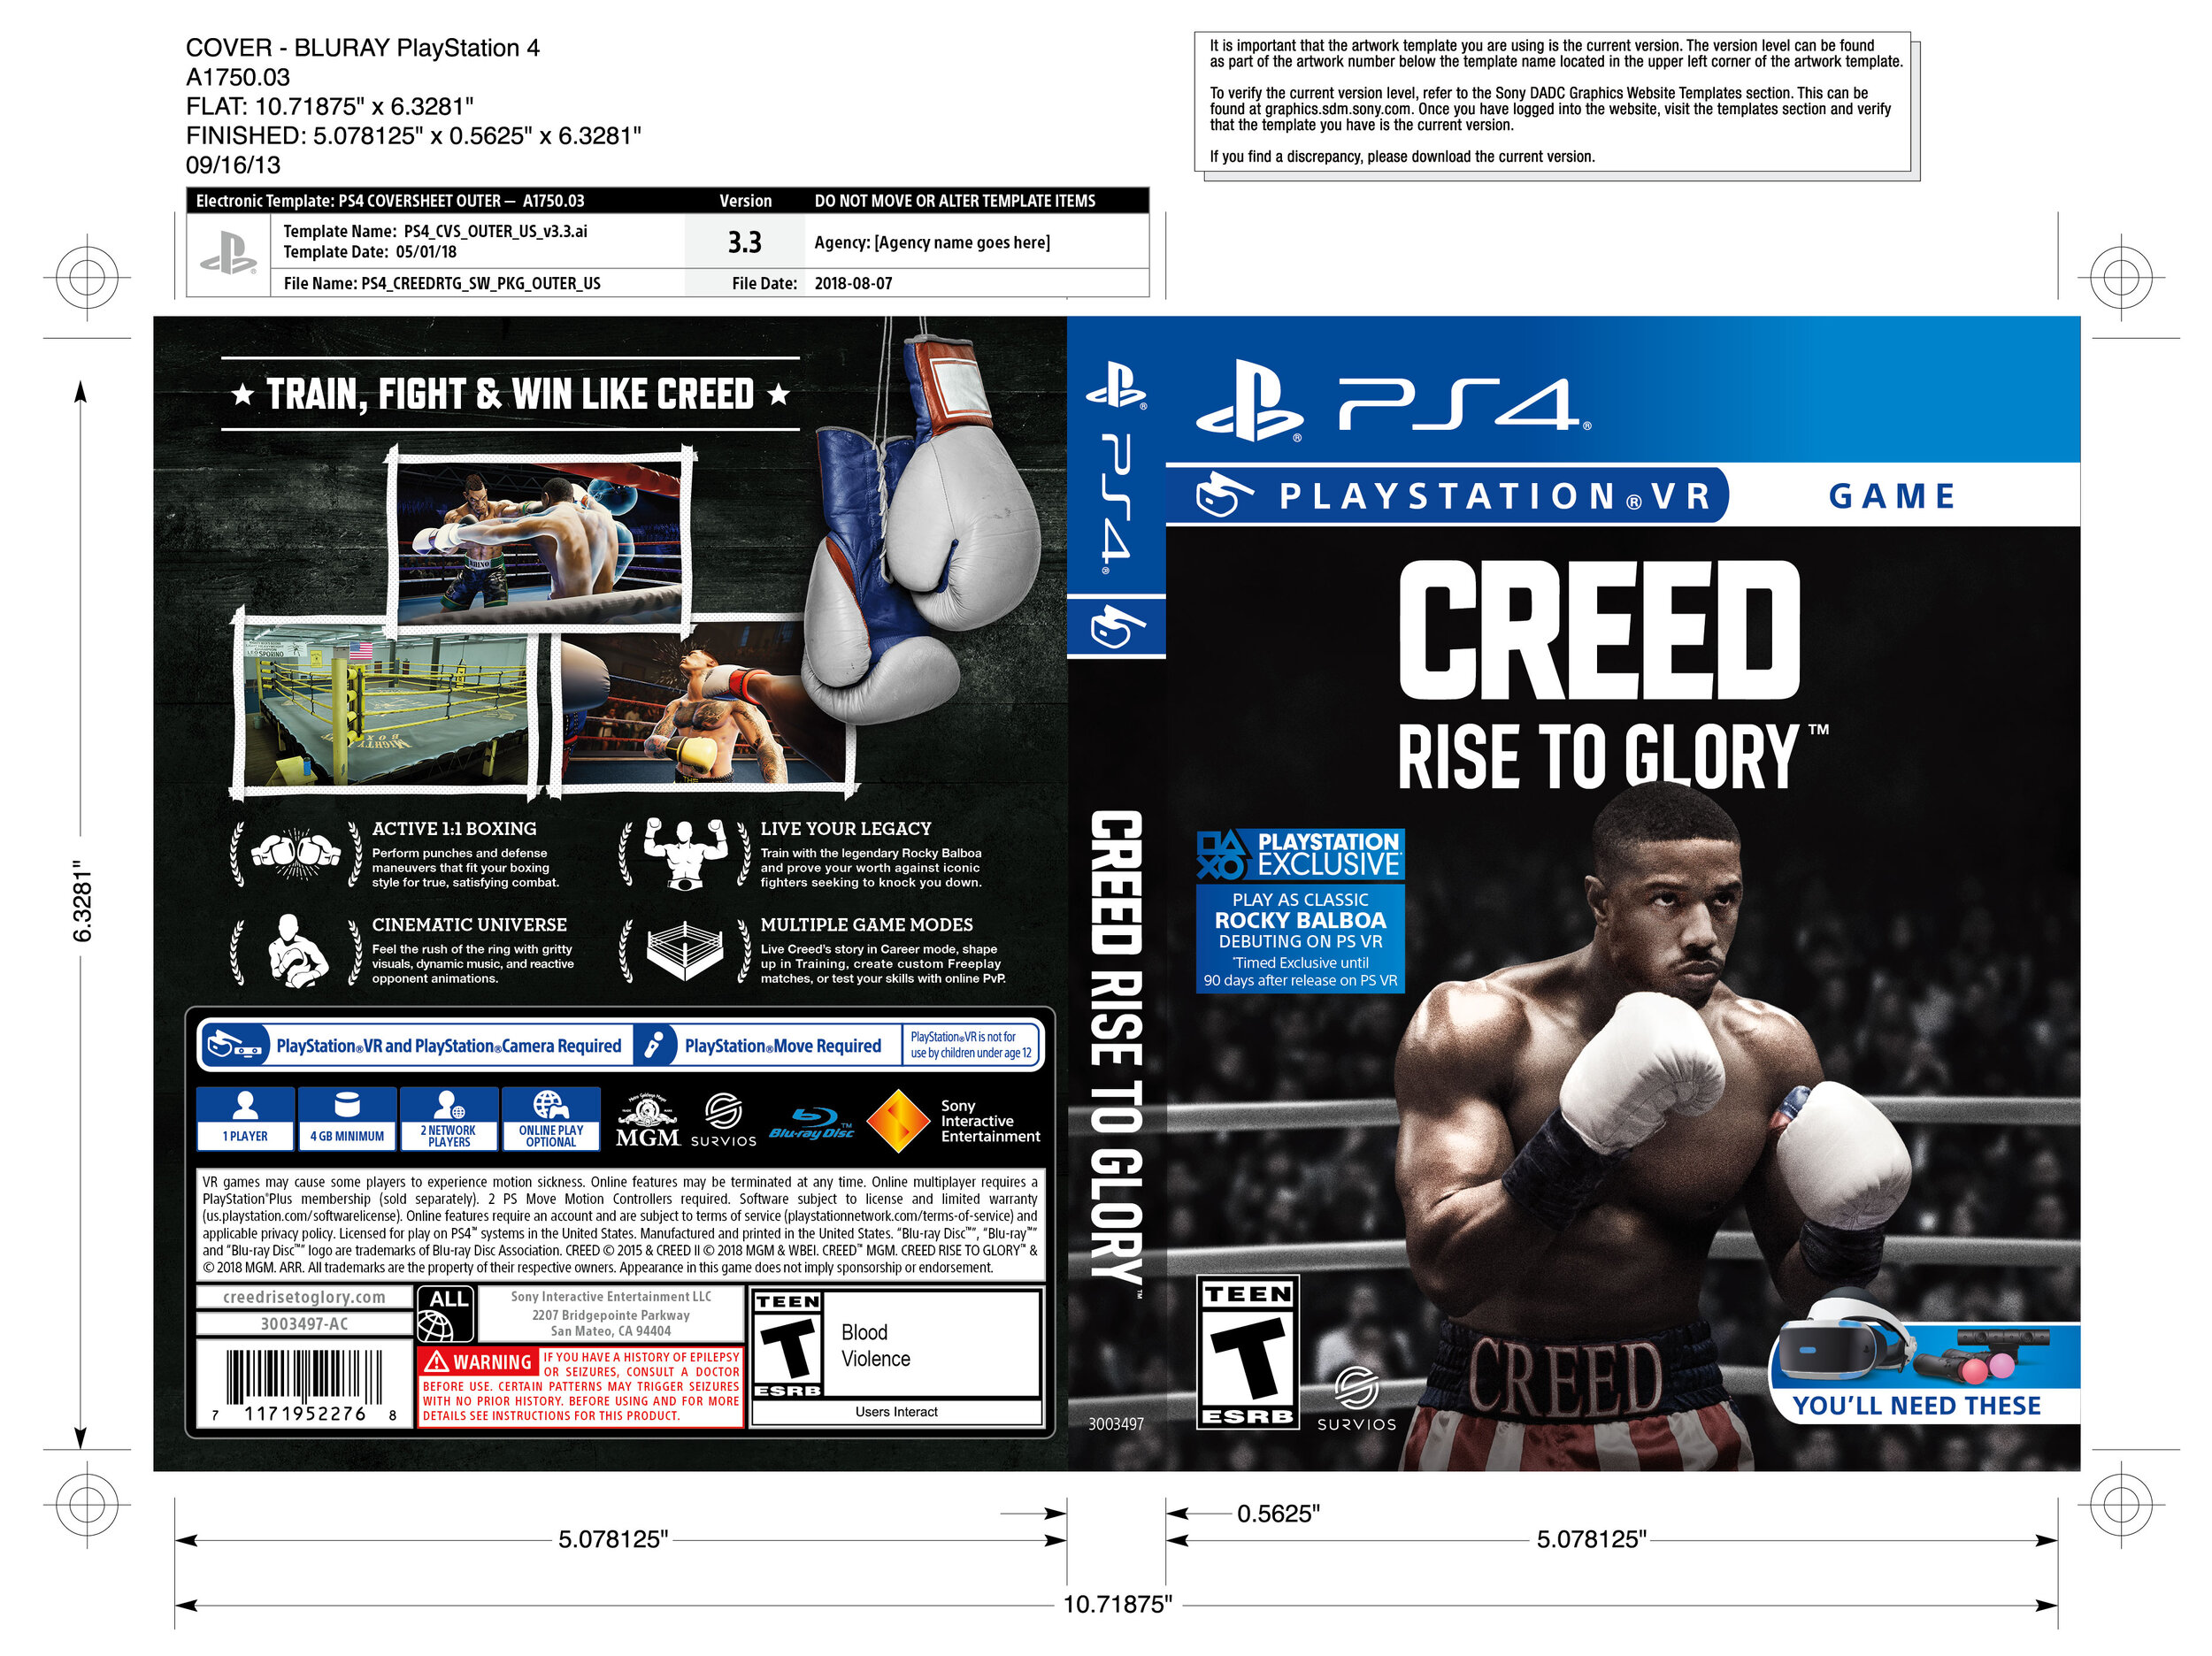 PS4_CREEDRTG_SW_PKG_OUTER_US_011_A1750.03-template.jpg